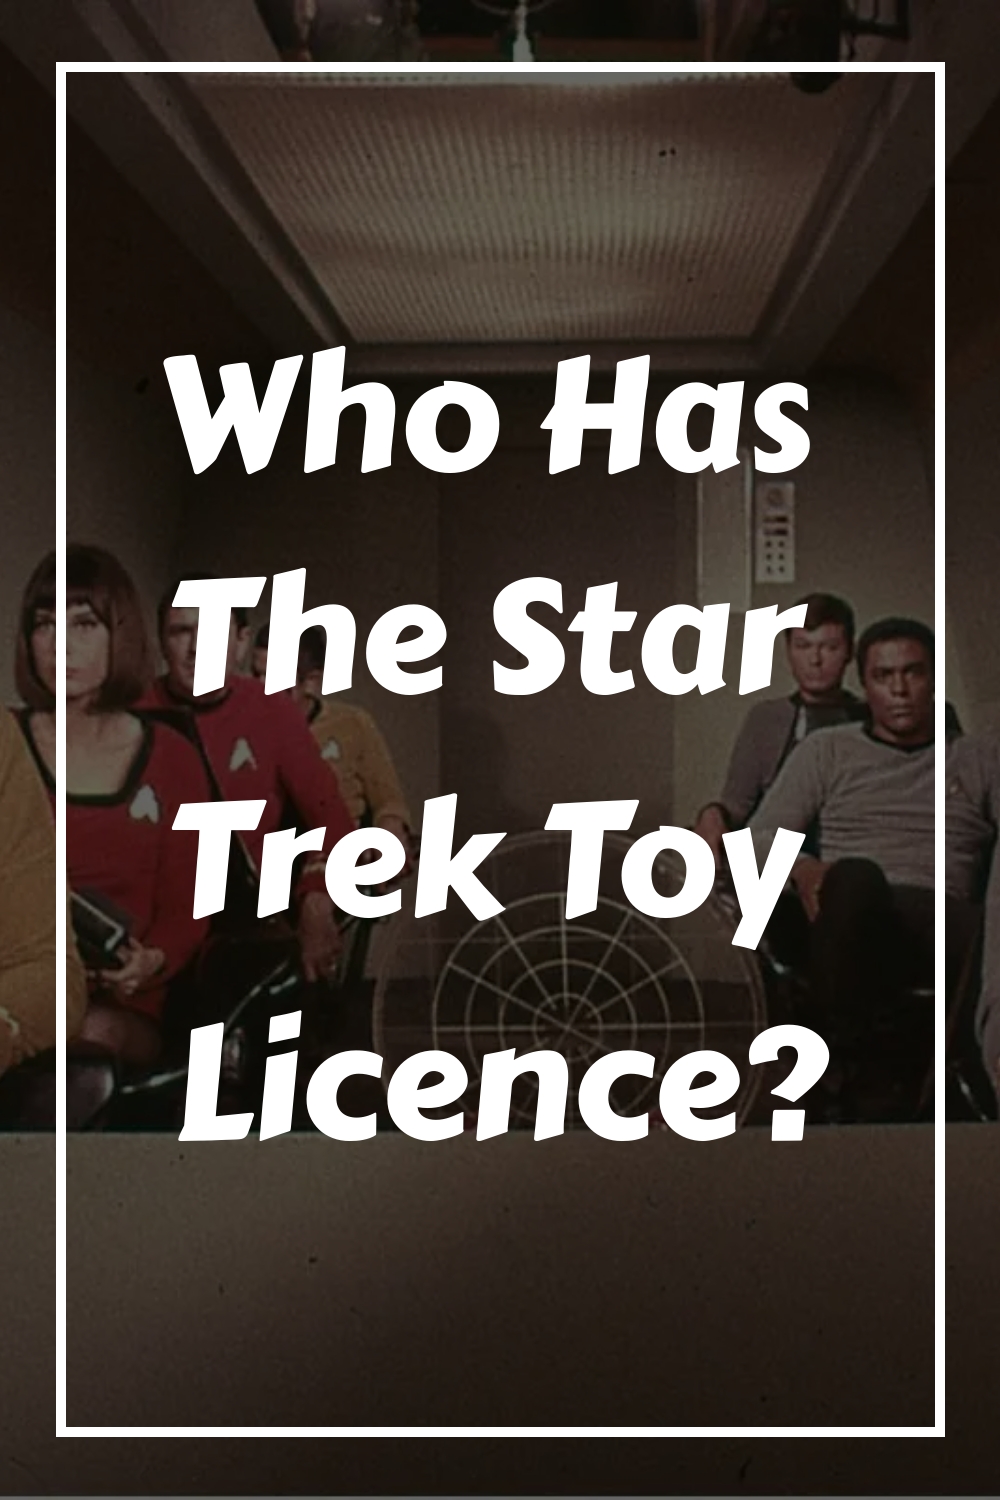 Who Has The Star Trek Toy Licence generated pin 57938 2